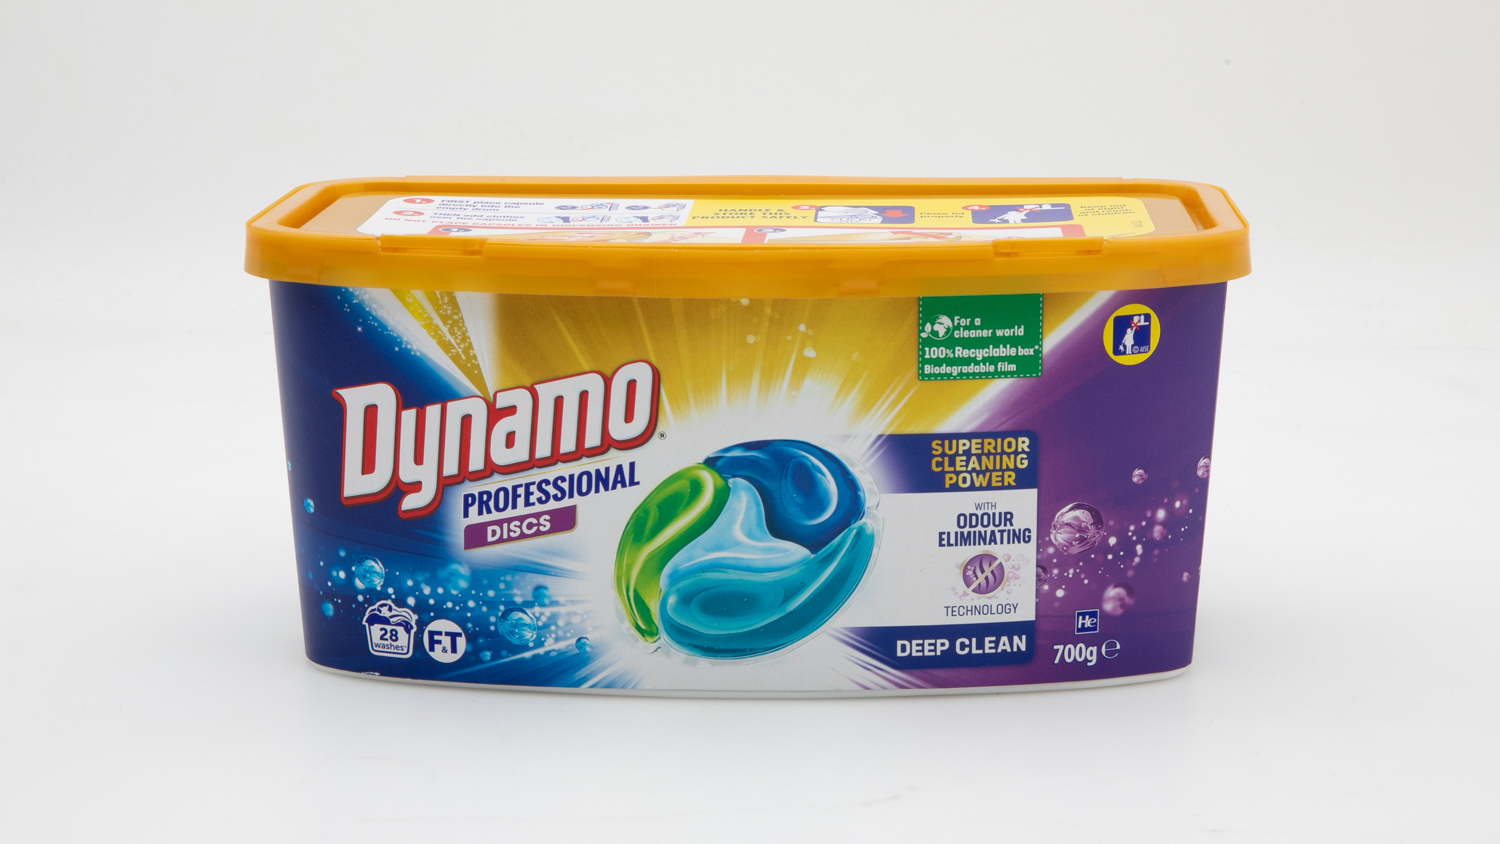 Dynamo Professional Discs With Odour Eliminating Technology 28 Capsules 700g Top Loader carousel image